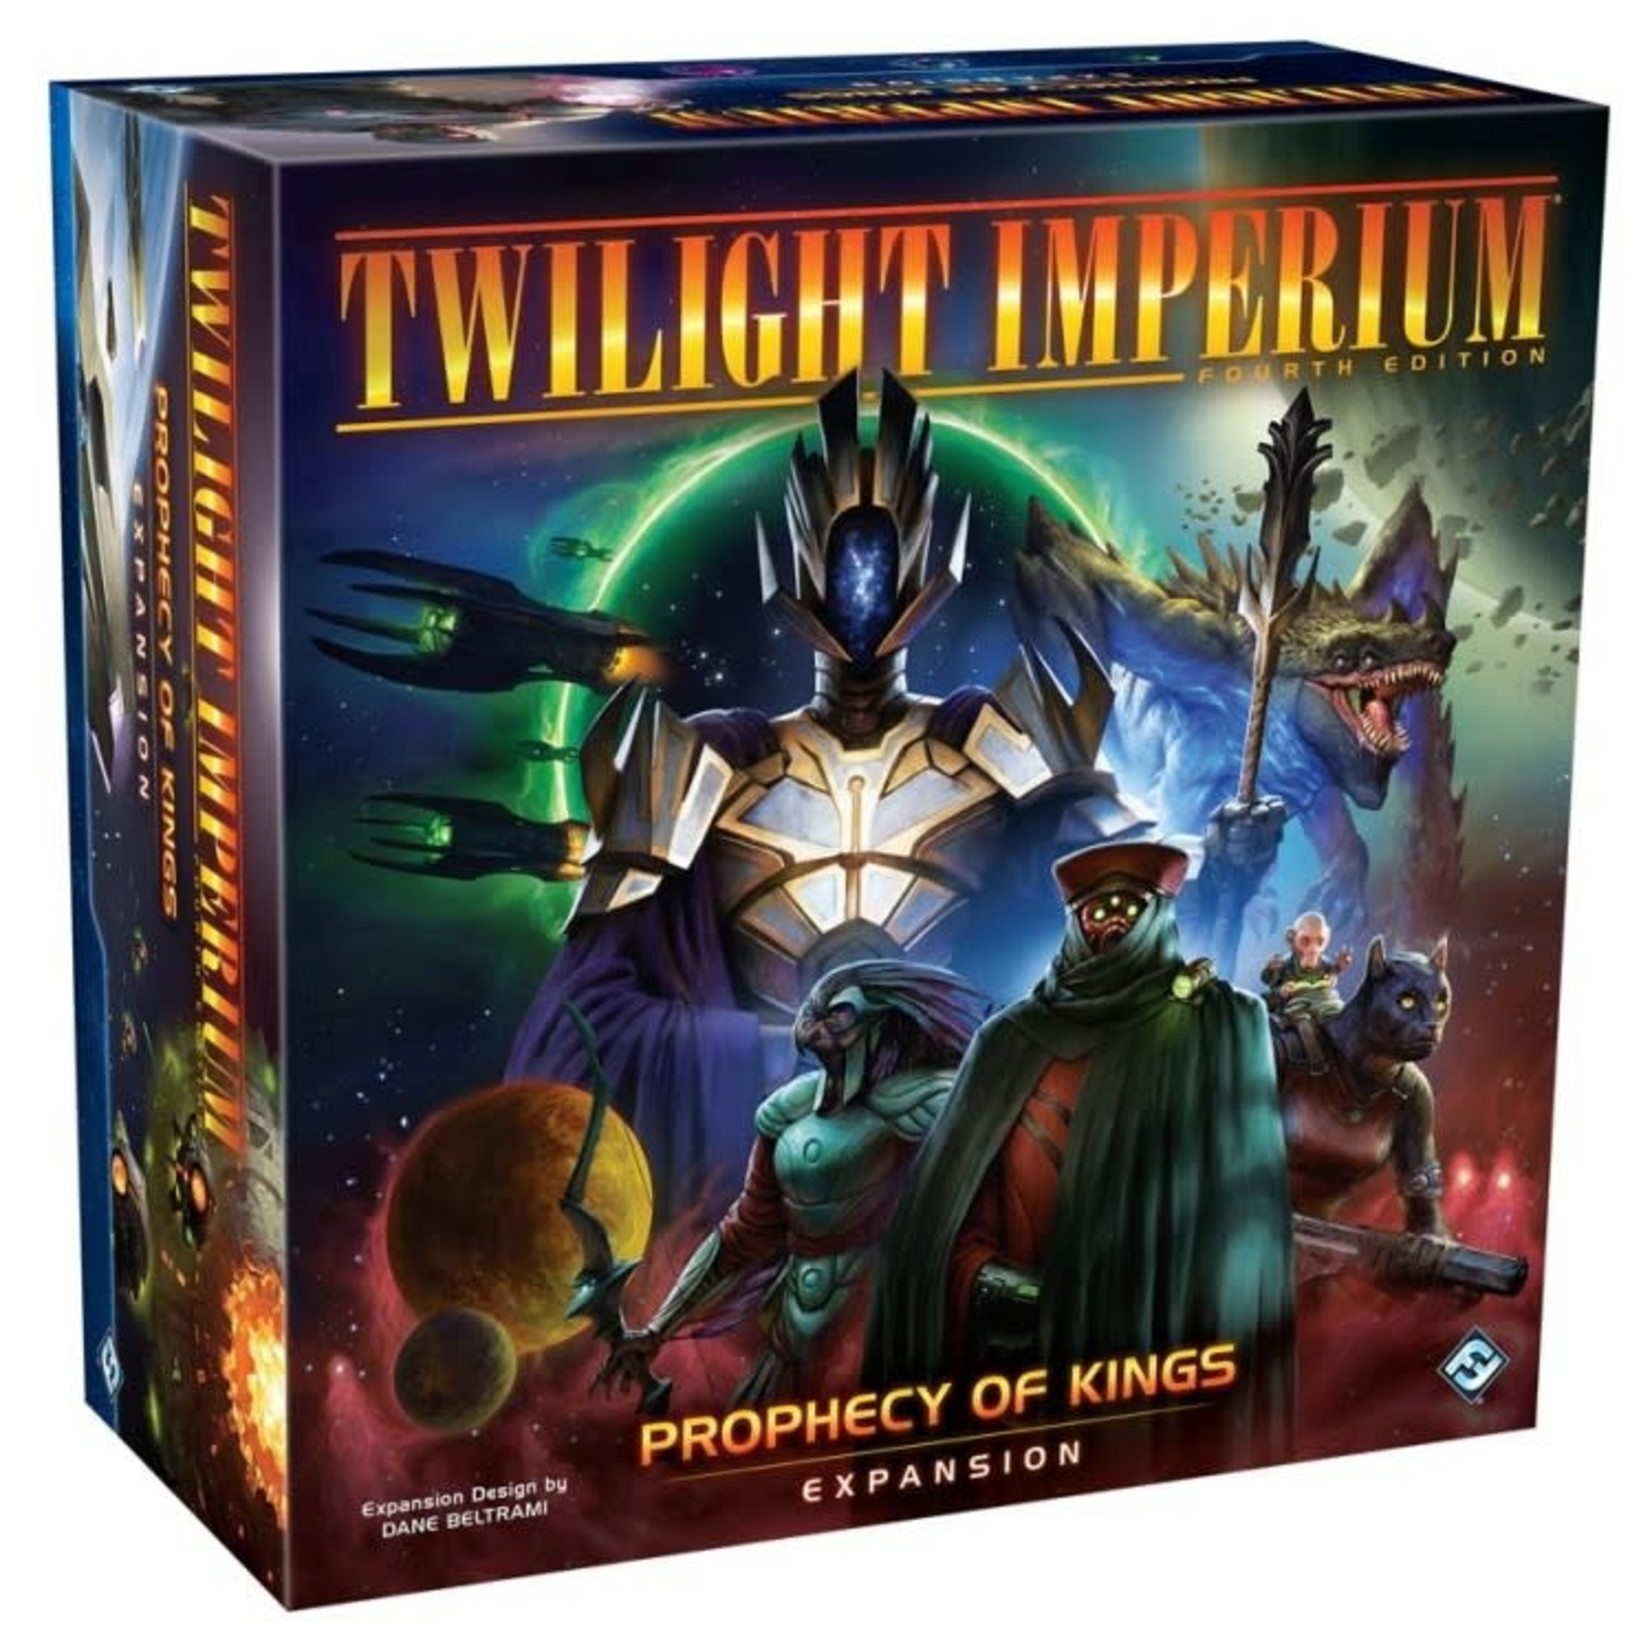 Fantasy Flight Games Twilight Imperium Fourth Edition: Prophecy of Kings Expansion